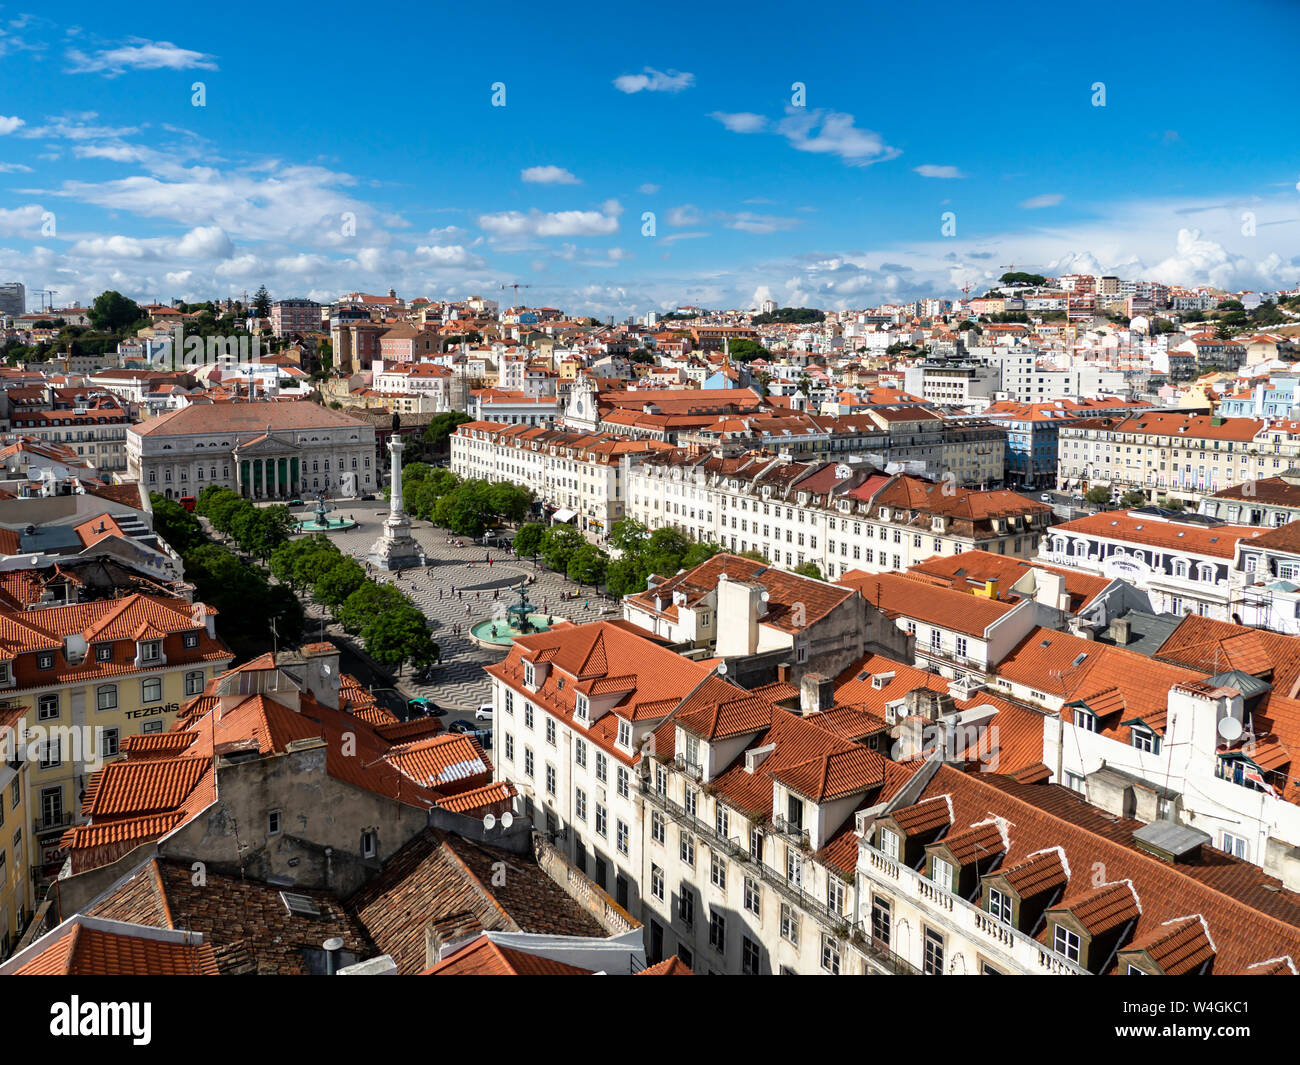 View over the city with Rossio Square and Dom Pedro IV monument, Lisbon, Portugal Stock Photo